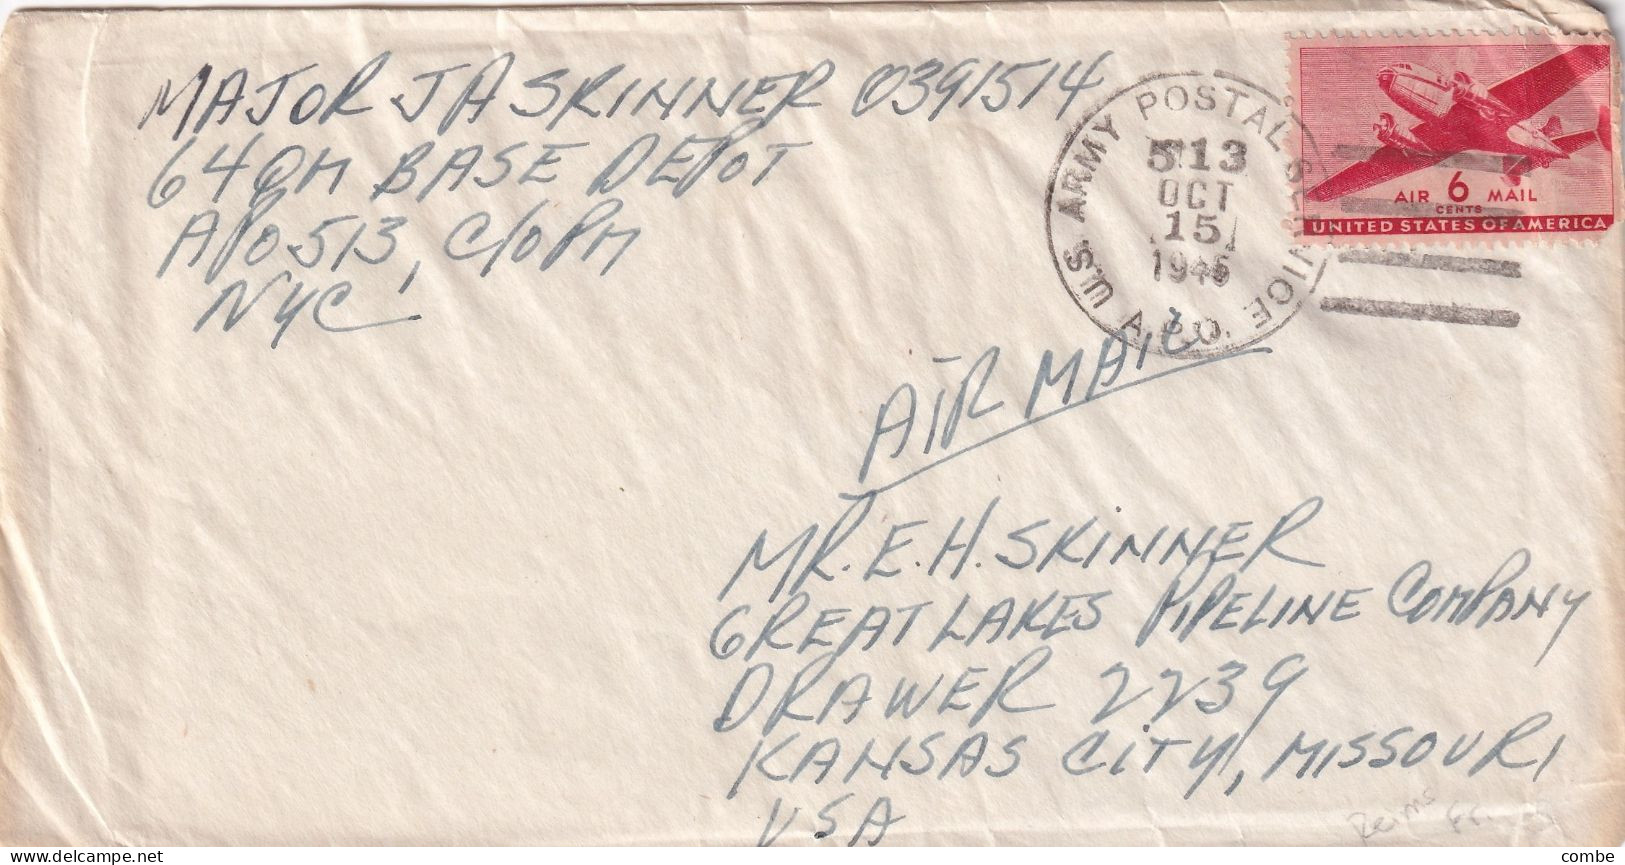 COVER USA. 15 OCT 1945. APO 513. REIMS. FRANCE. TO KANSAS CITY - Lettres & Documents